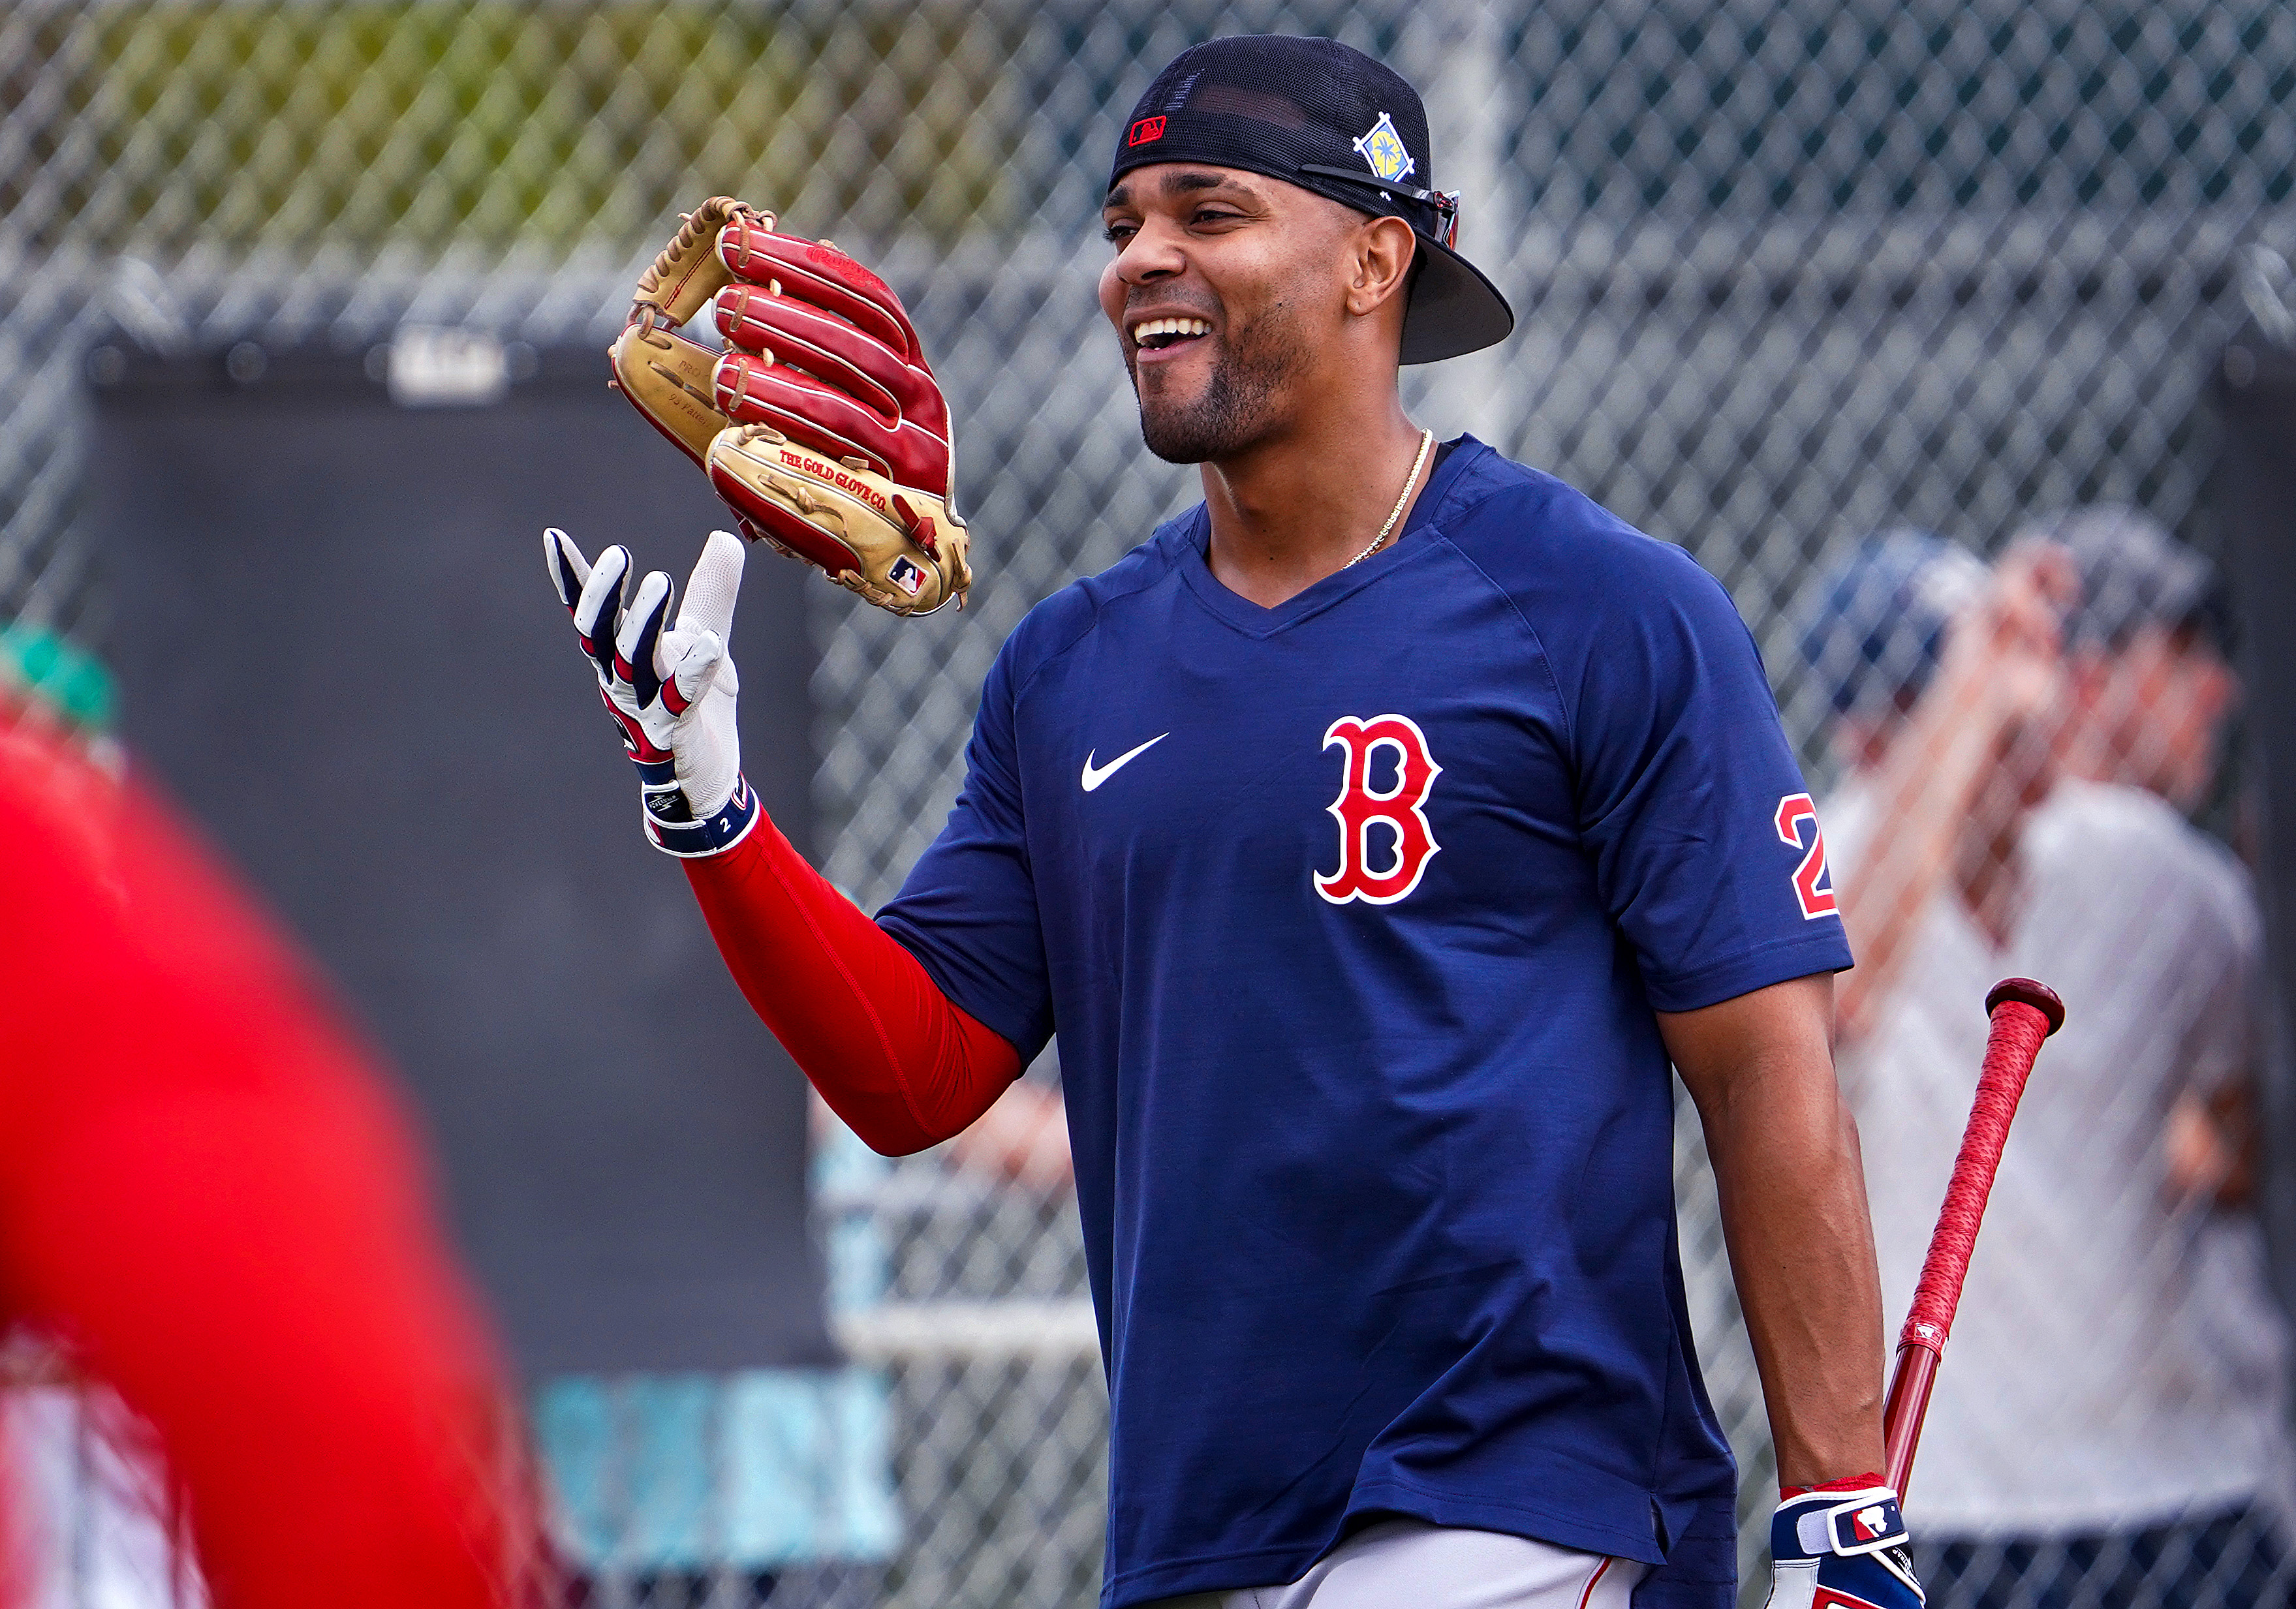 No dollar signs in his eyes: Xander Bogaerts focuses on now – Boston Herald